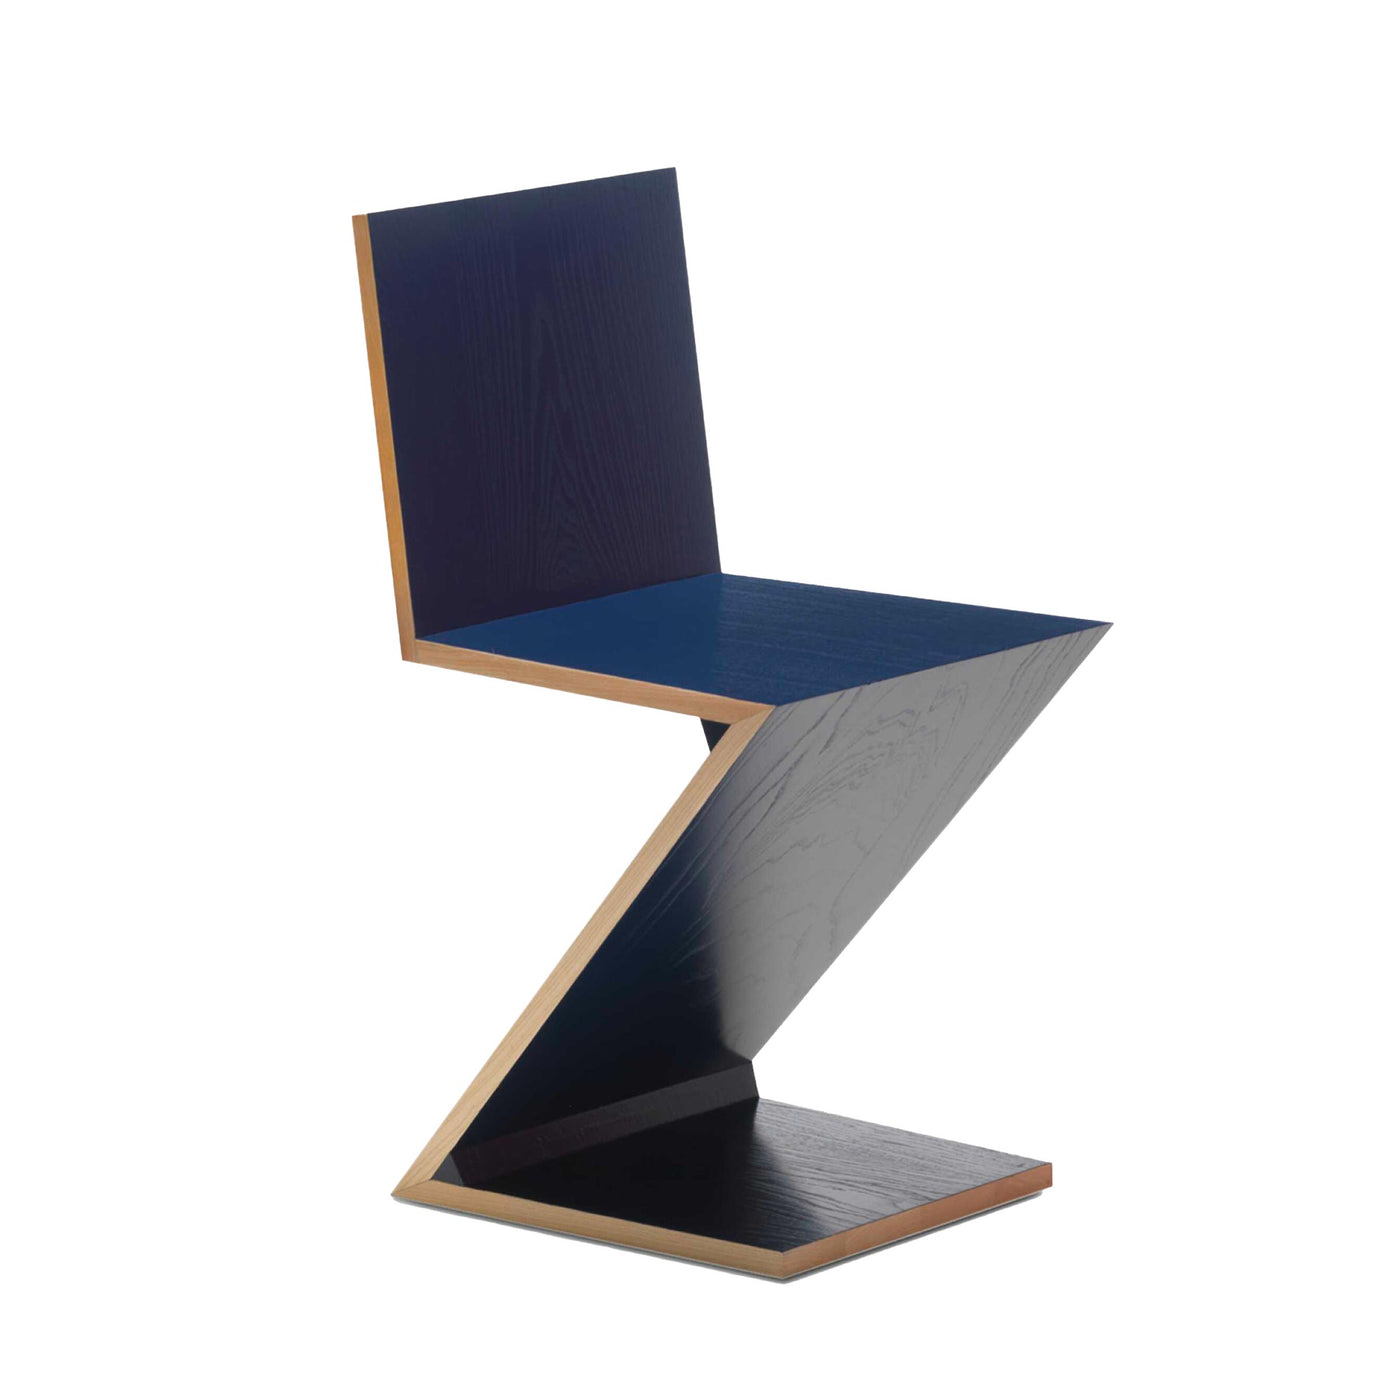 Cantiliver Wood Chair ZIG ZAG, designed by Gerrit T. Rietveld for Cassina 04